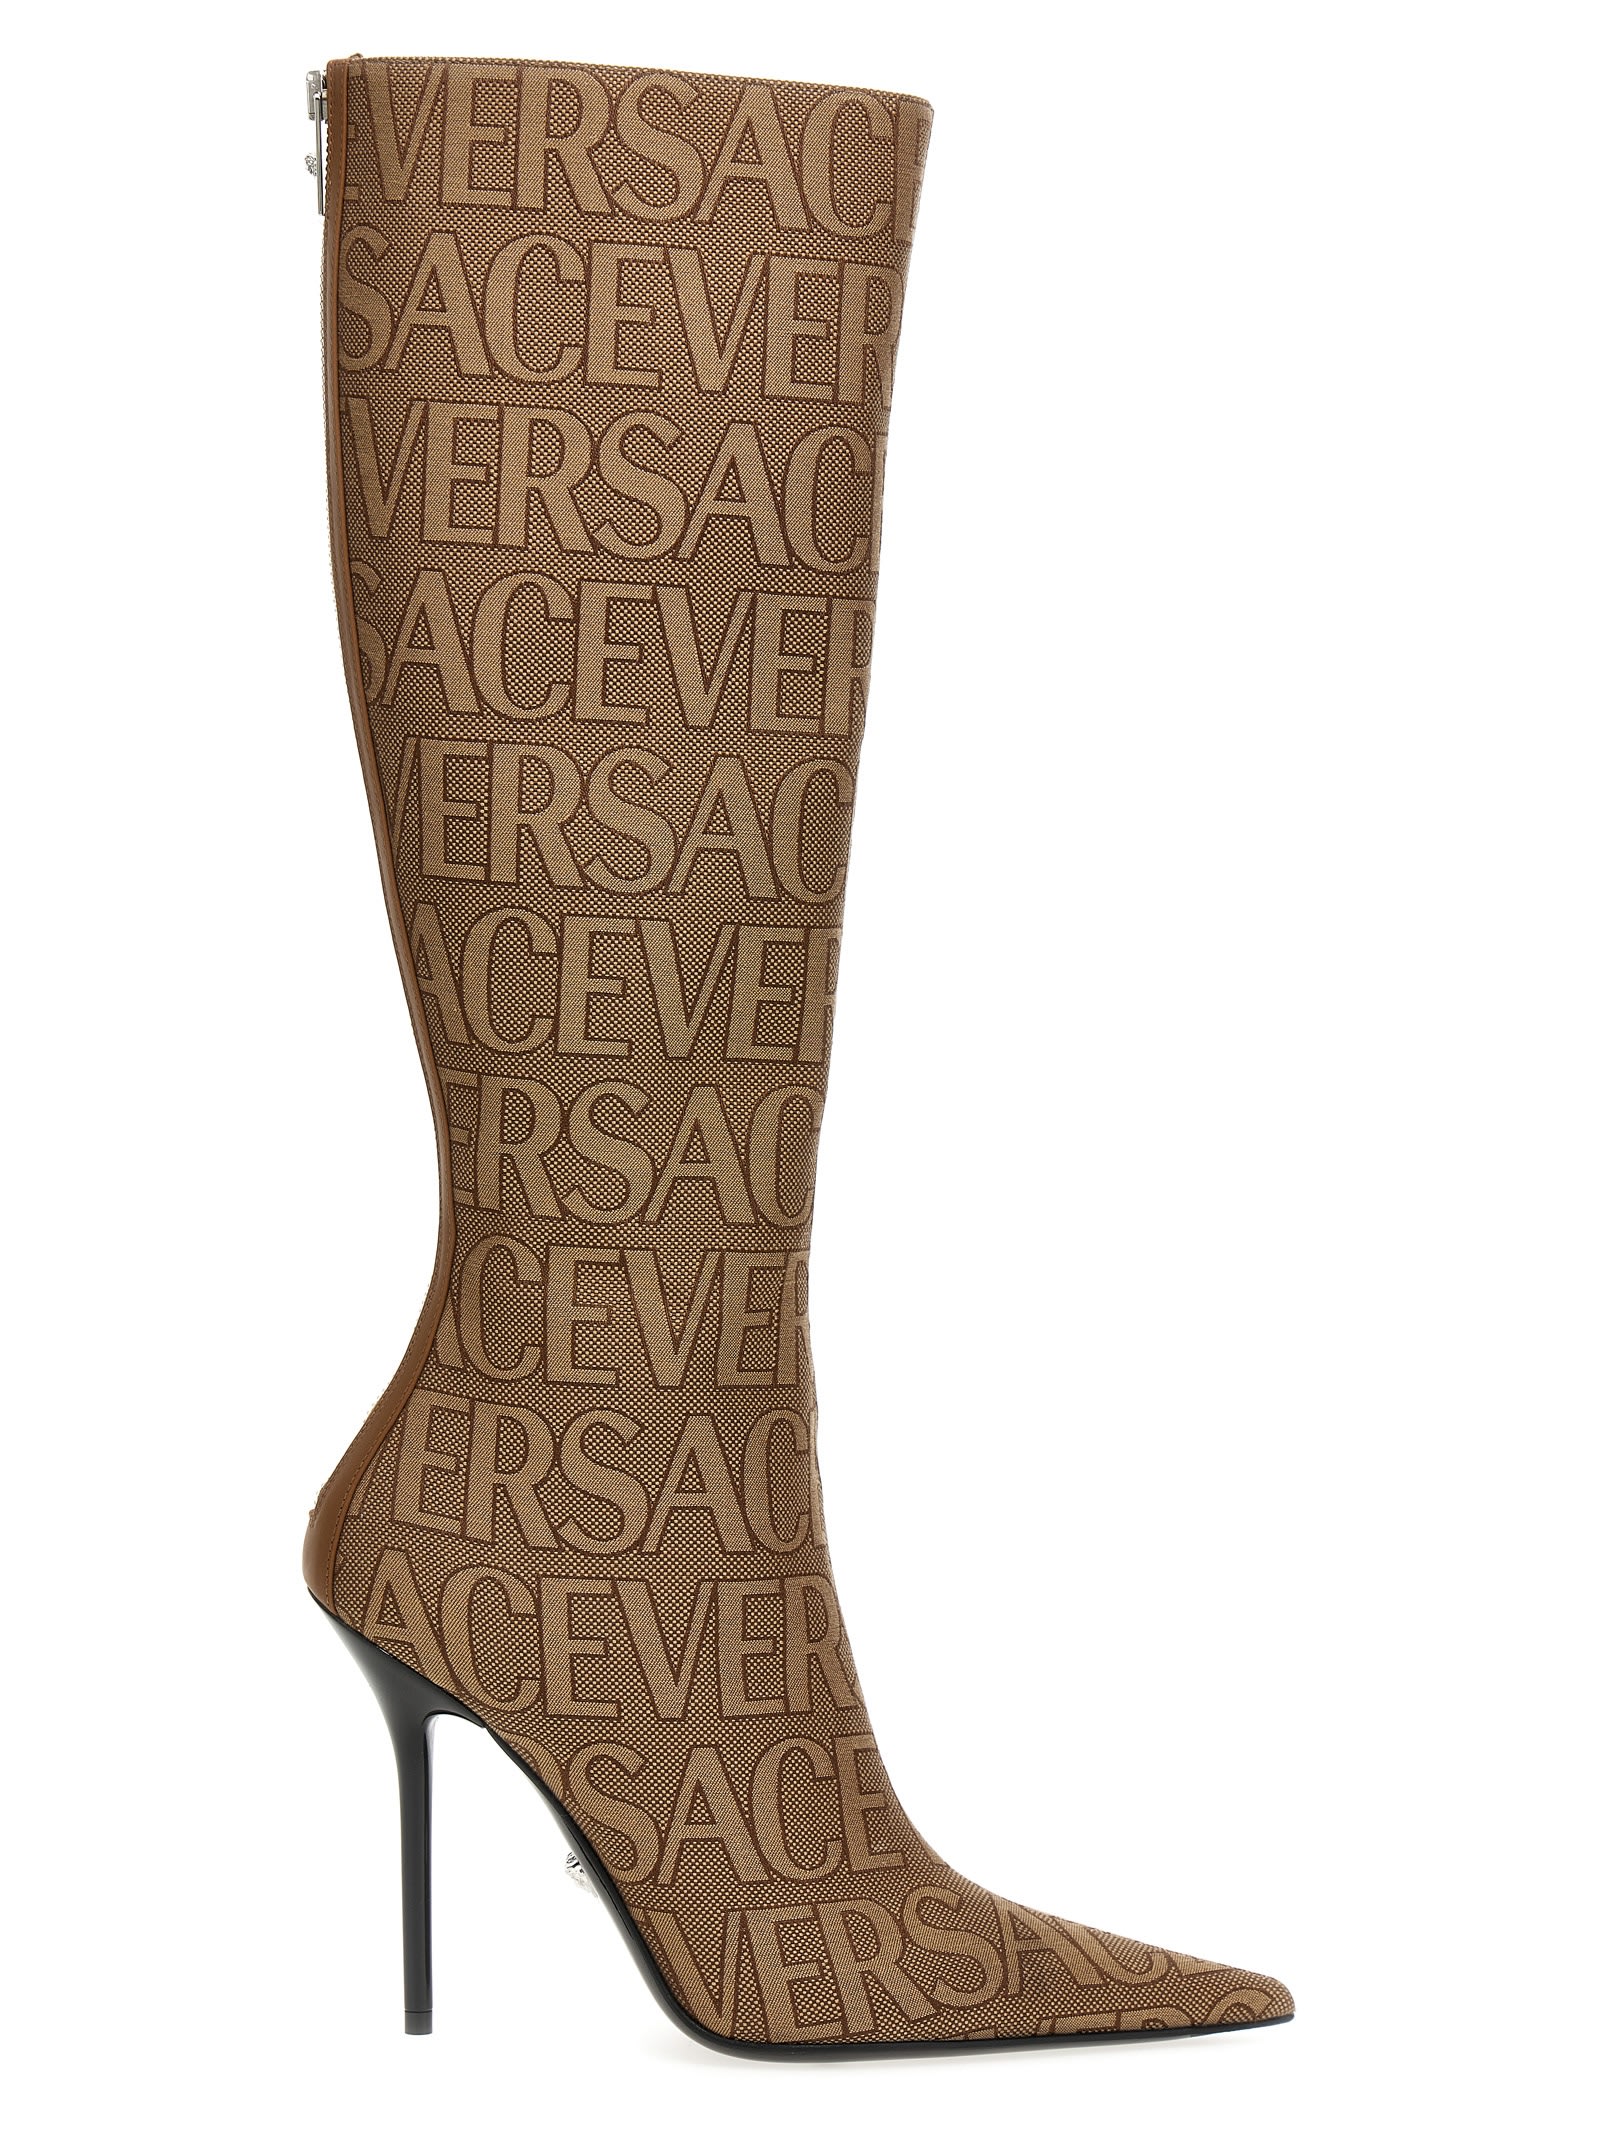 versace Allover Boots